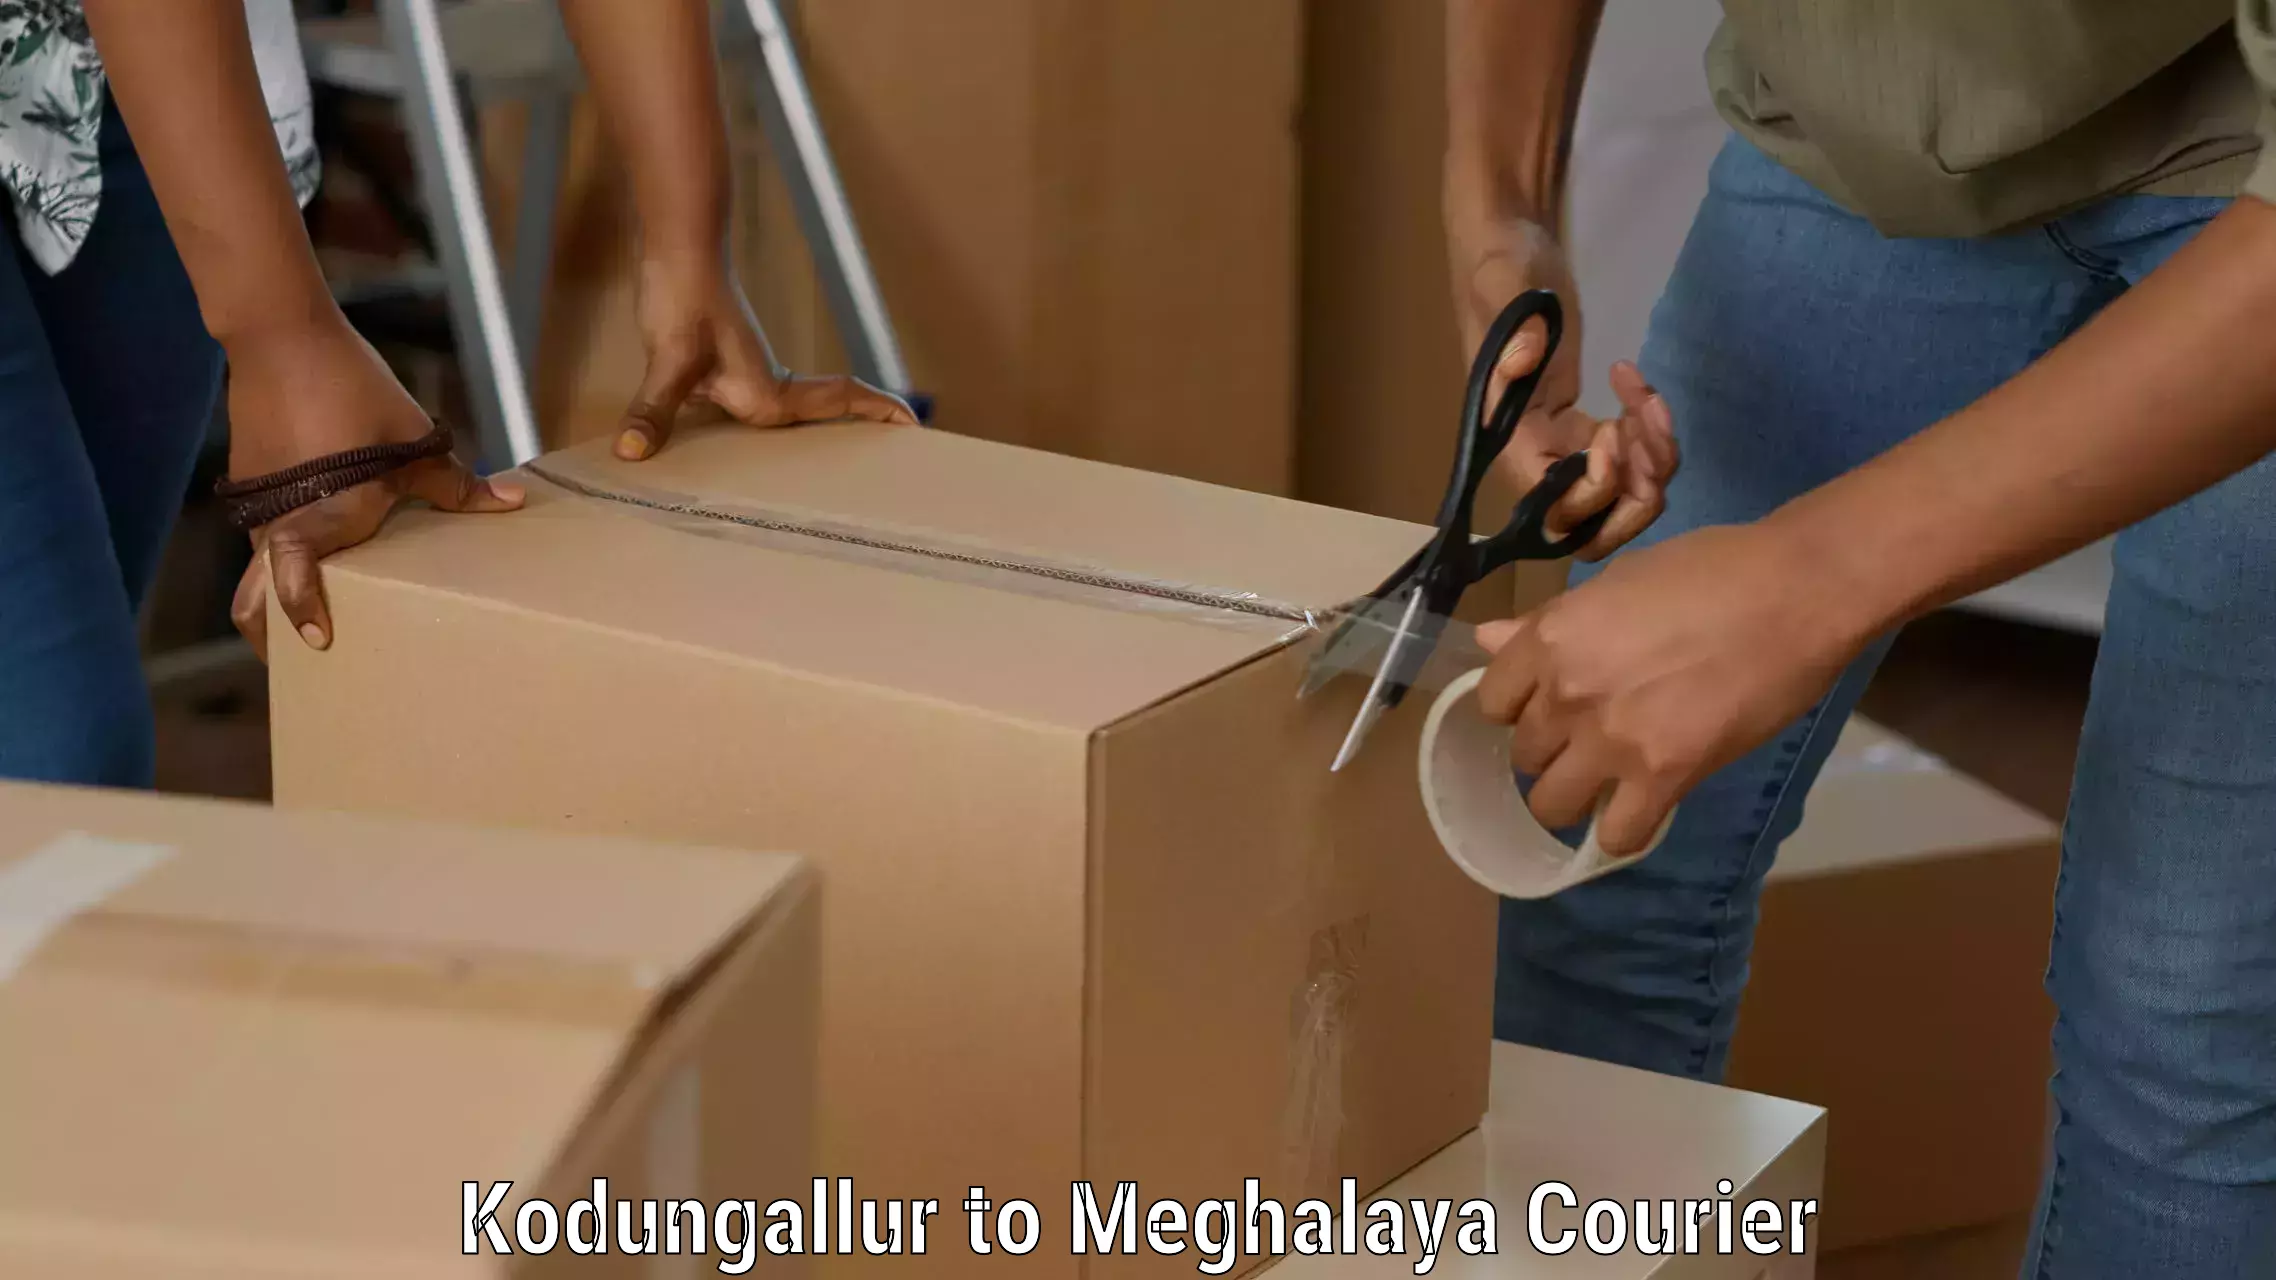 Expedited shipping methods Kodungallur to Shillong